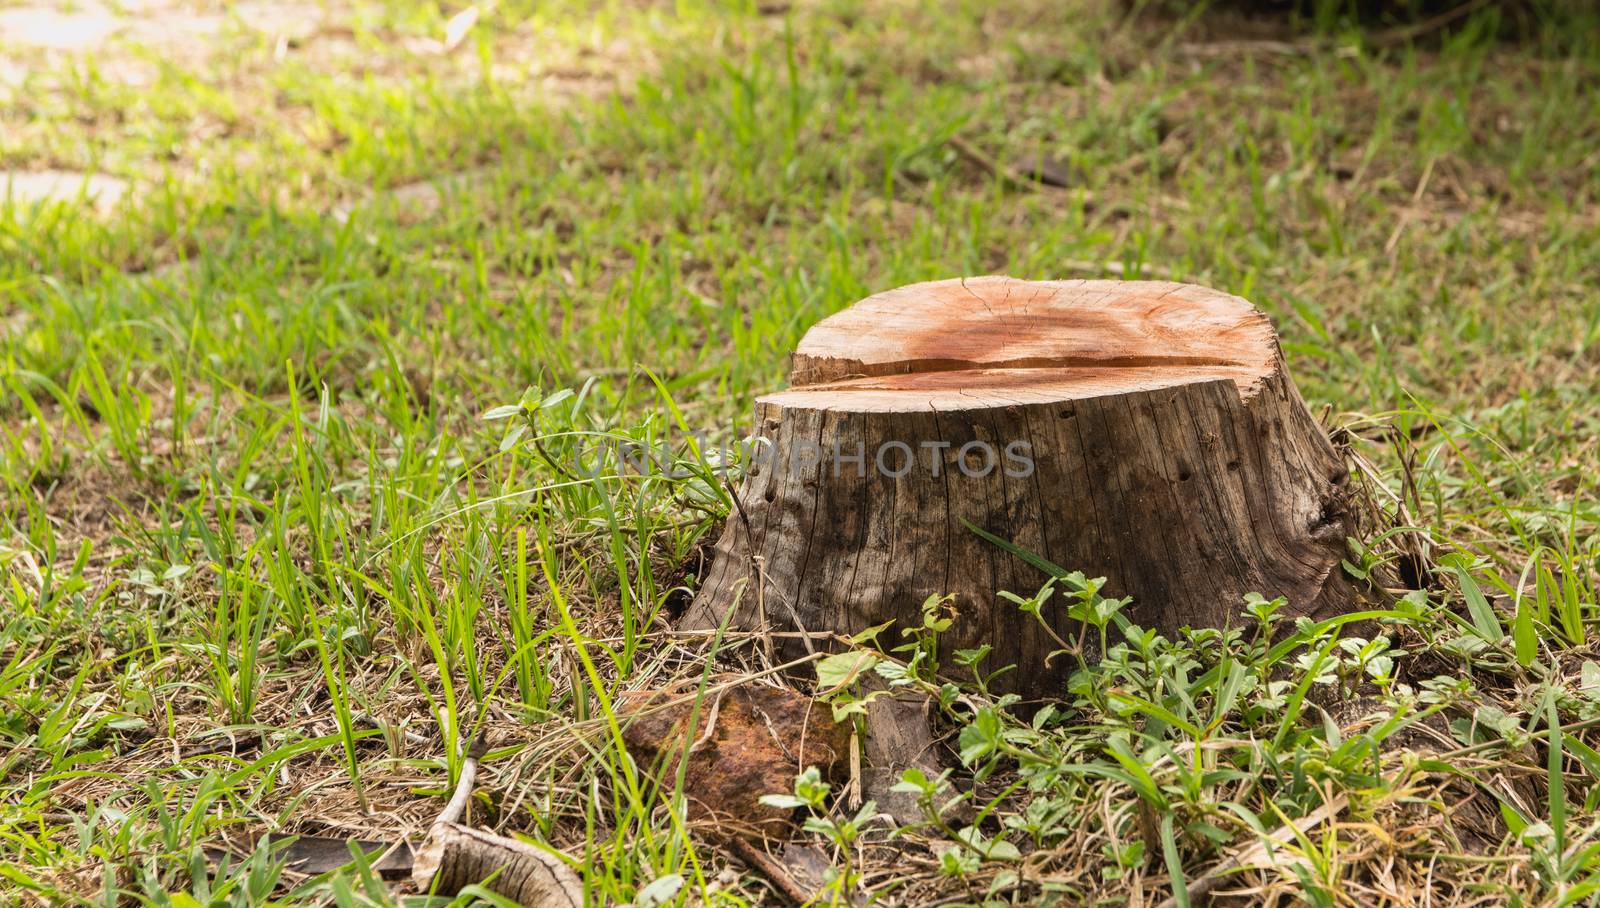 Stump on green grass in the garden. Old tree stump in the summer by kirisa99